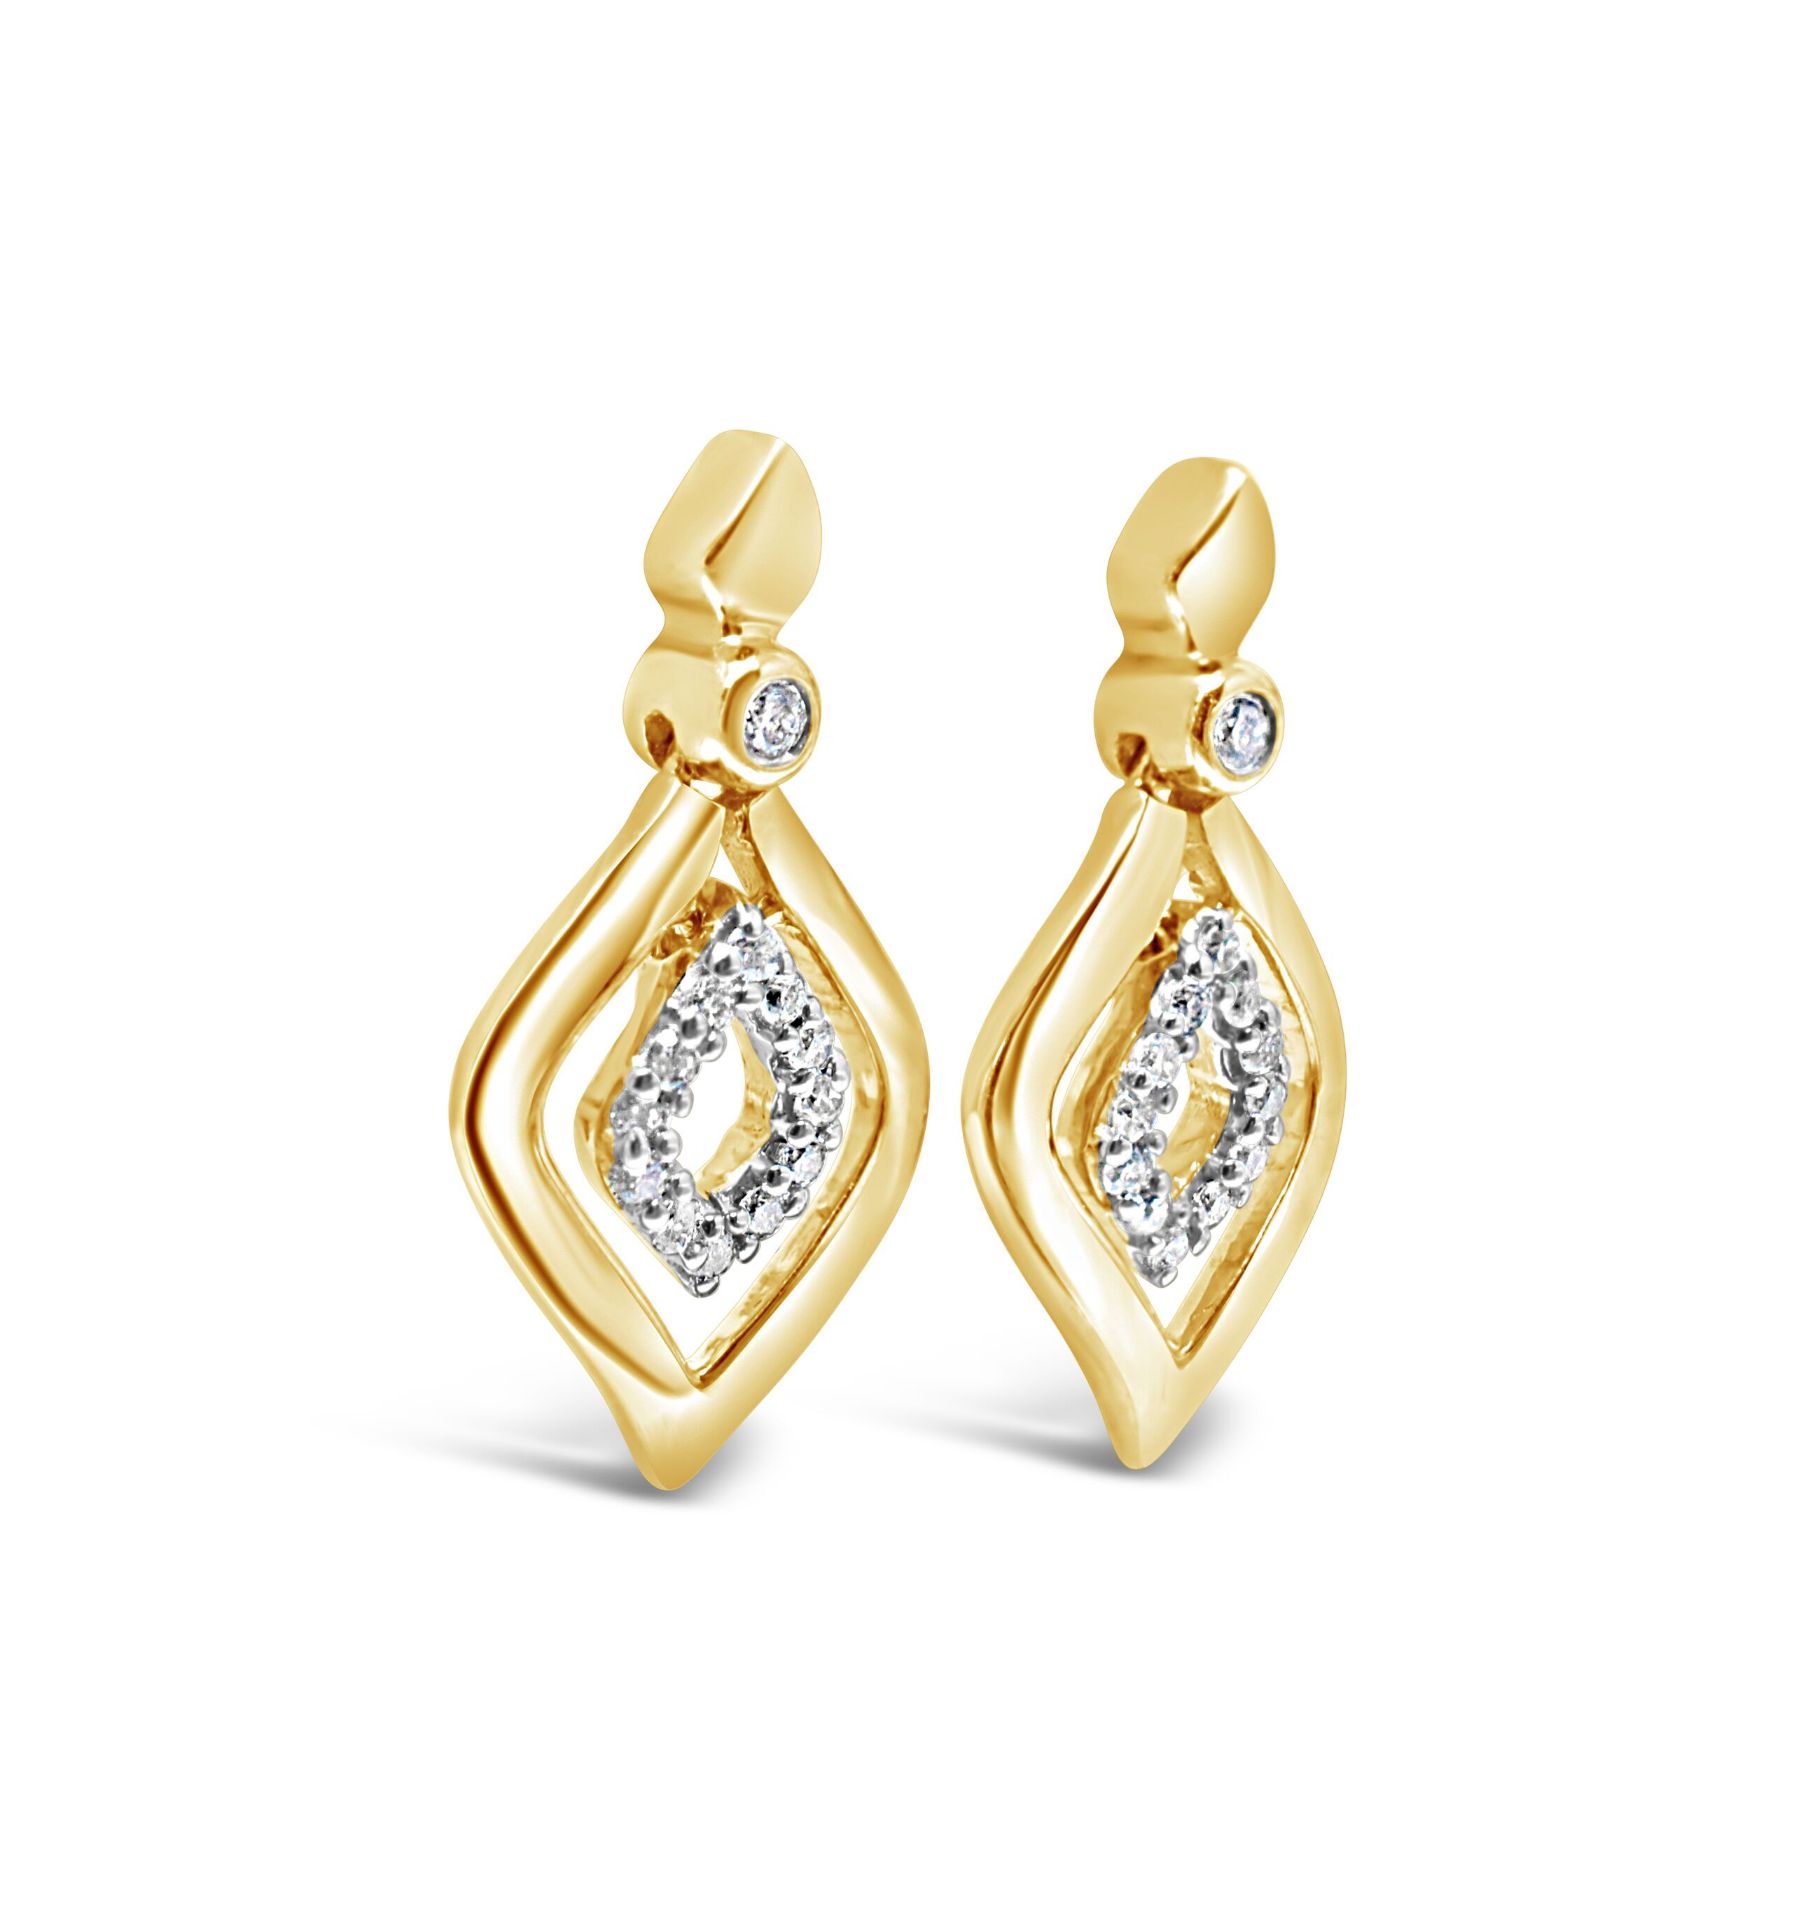 Classic diamond drop earrings, Metal 9ct yellow gold, Weight 1.9, Diamond Weight (ct) 0.04, Colour